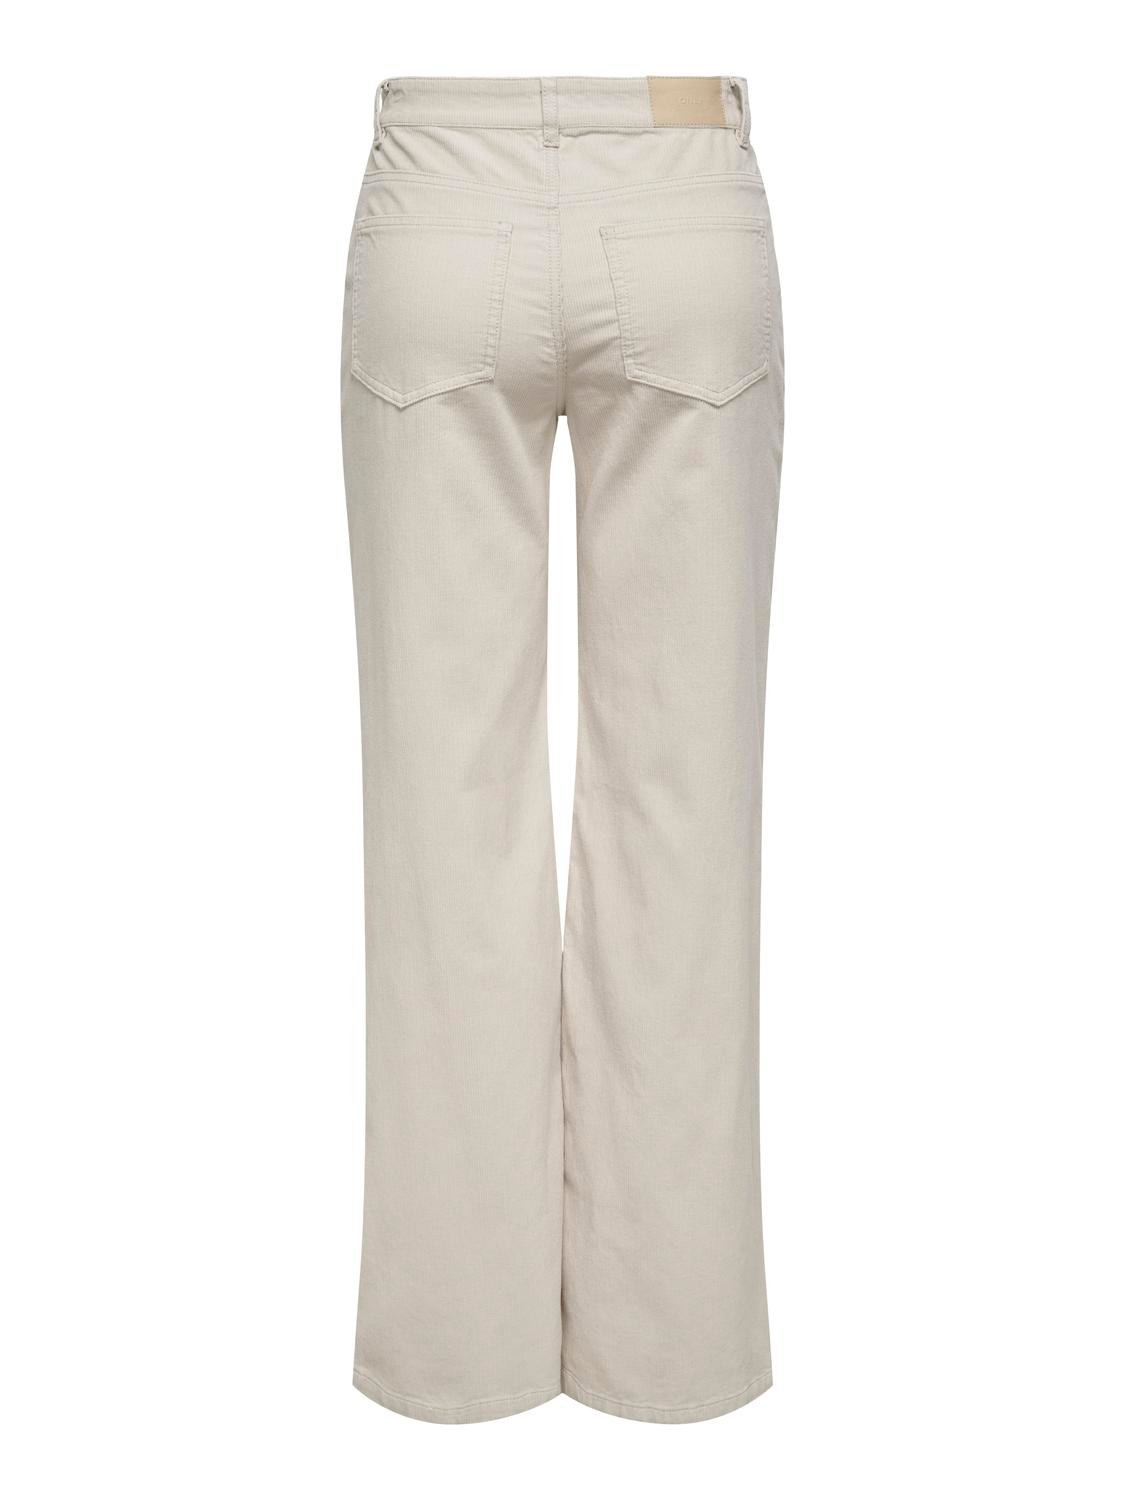 ONLY Wide leg trousers with high waist -Pumice Stone - 15325094